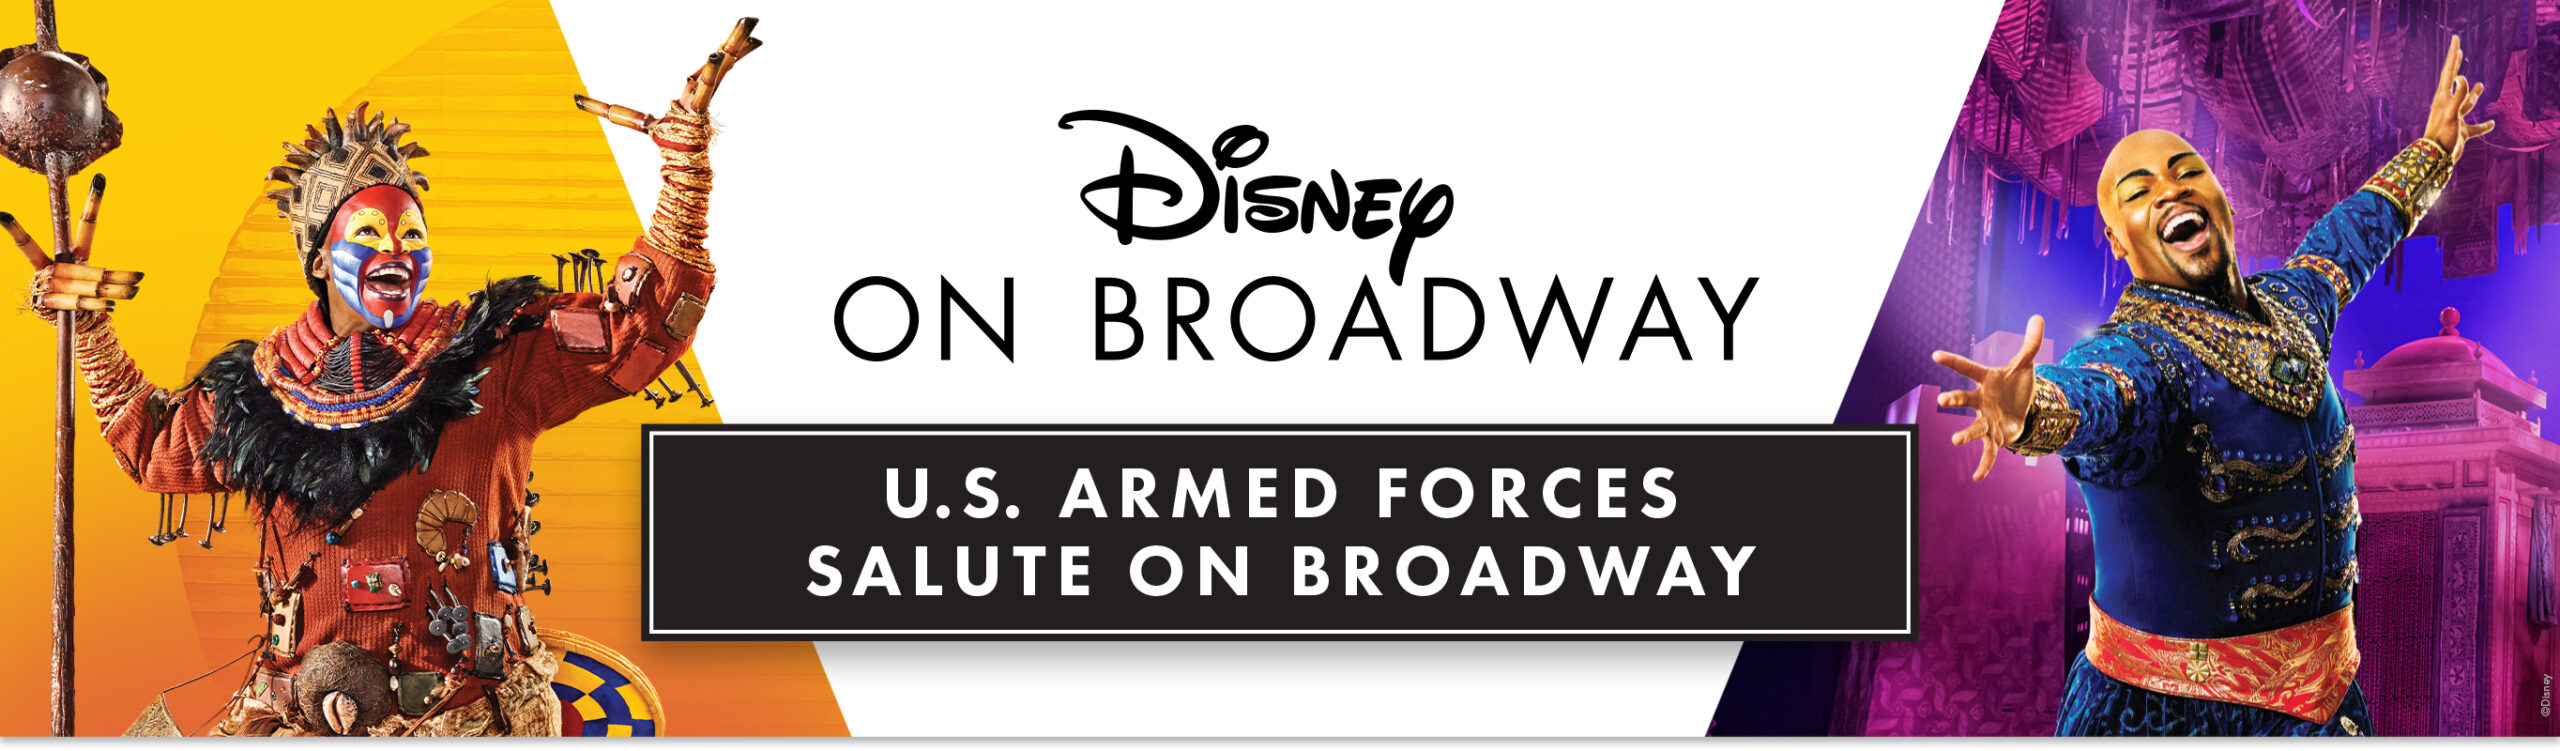 Disney on Broadway U.S. Armed Forces Salute on Broadway